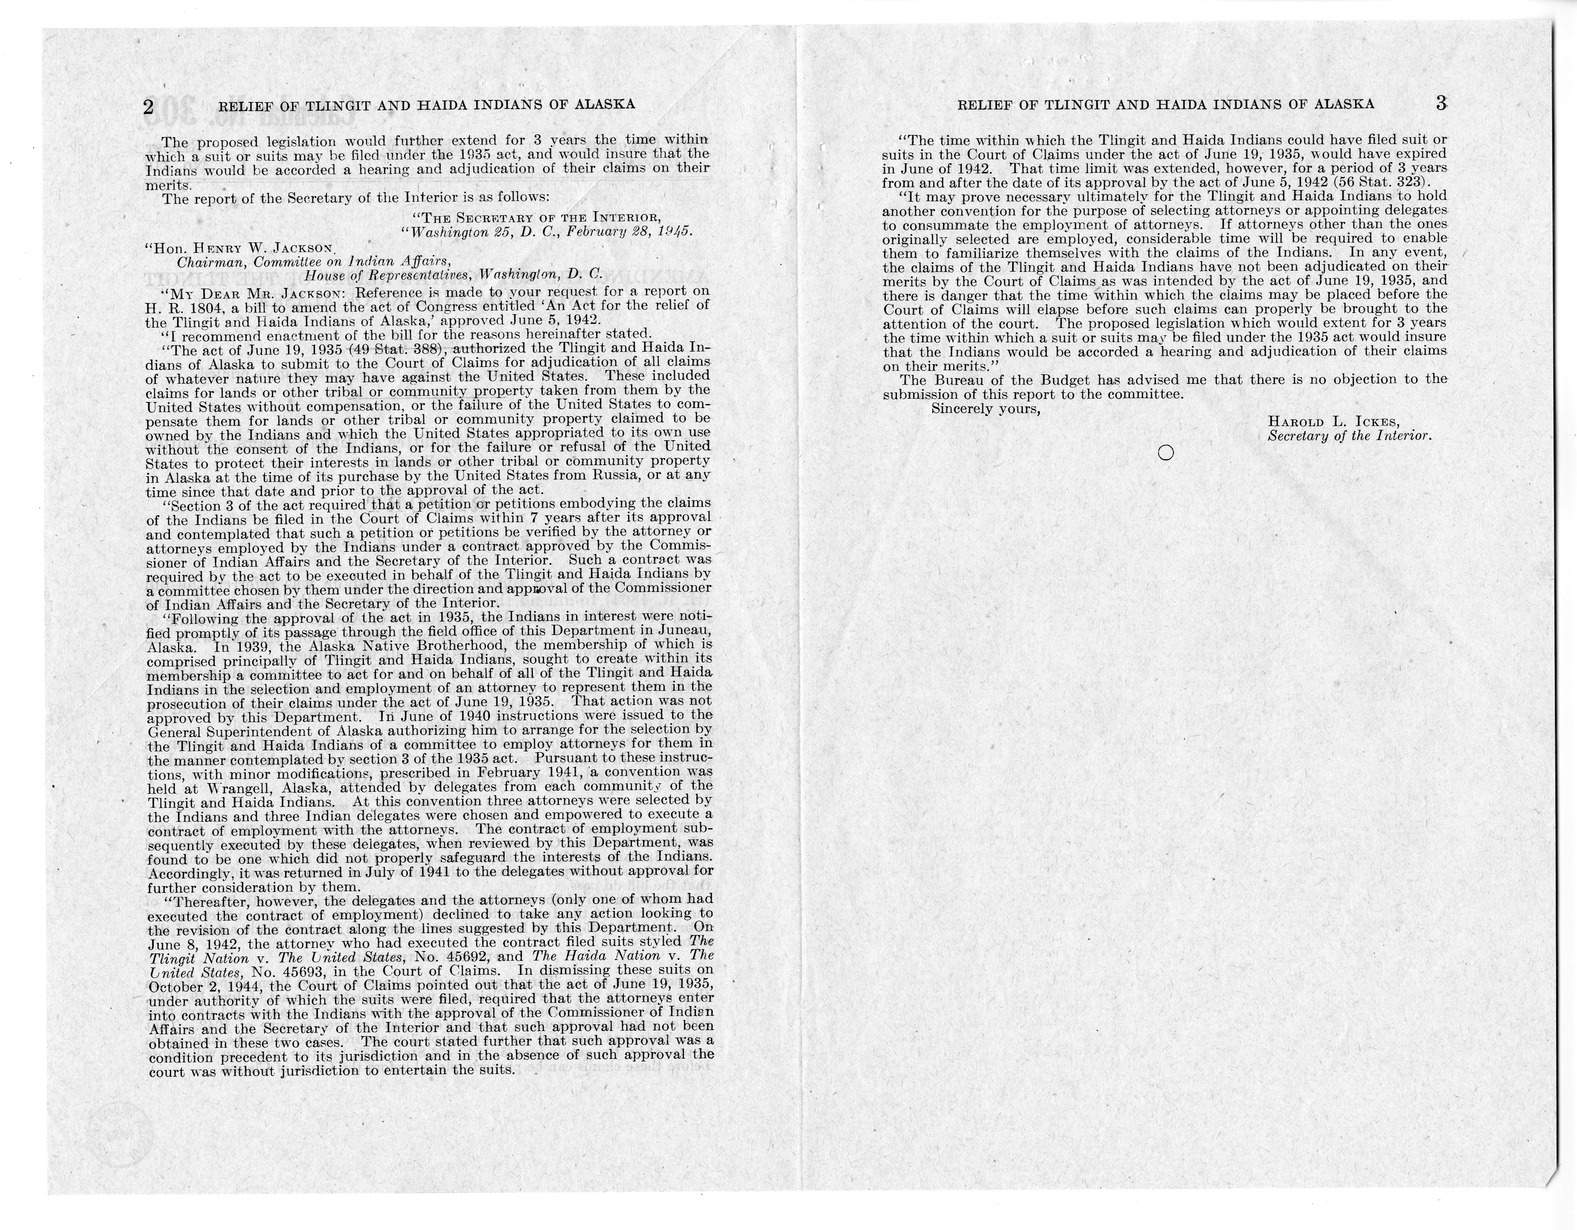 Memorandum from Frederick J. Bailey to M. C. Latta, H. R. 1804, To Amend an Act for the Relief of the Tlingit and Haida Indians of Alaska, with Attachments